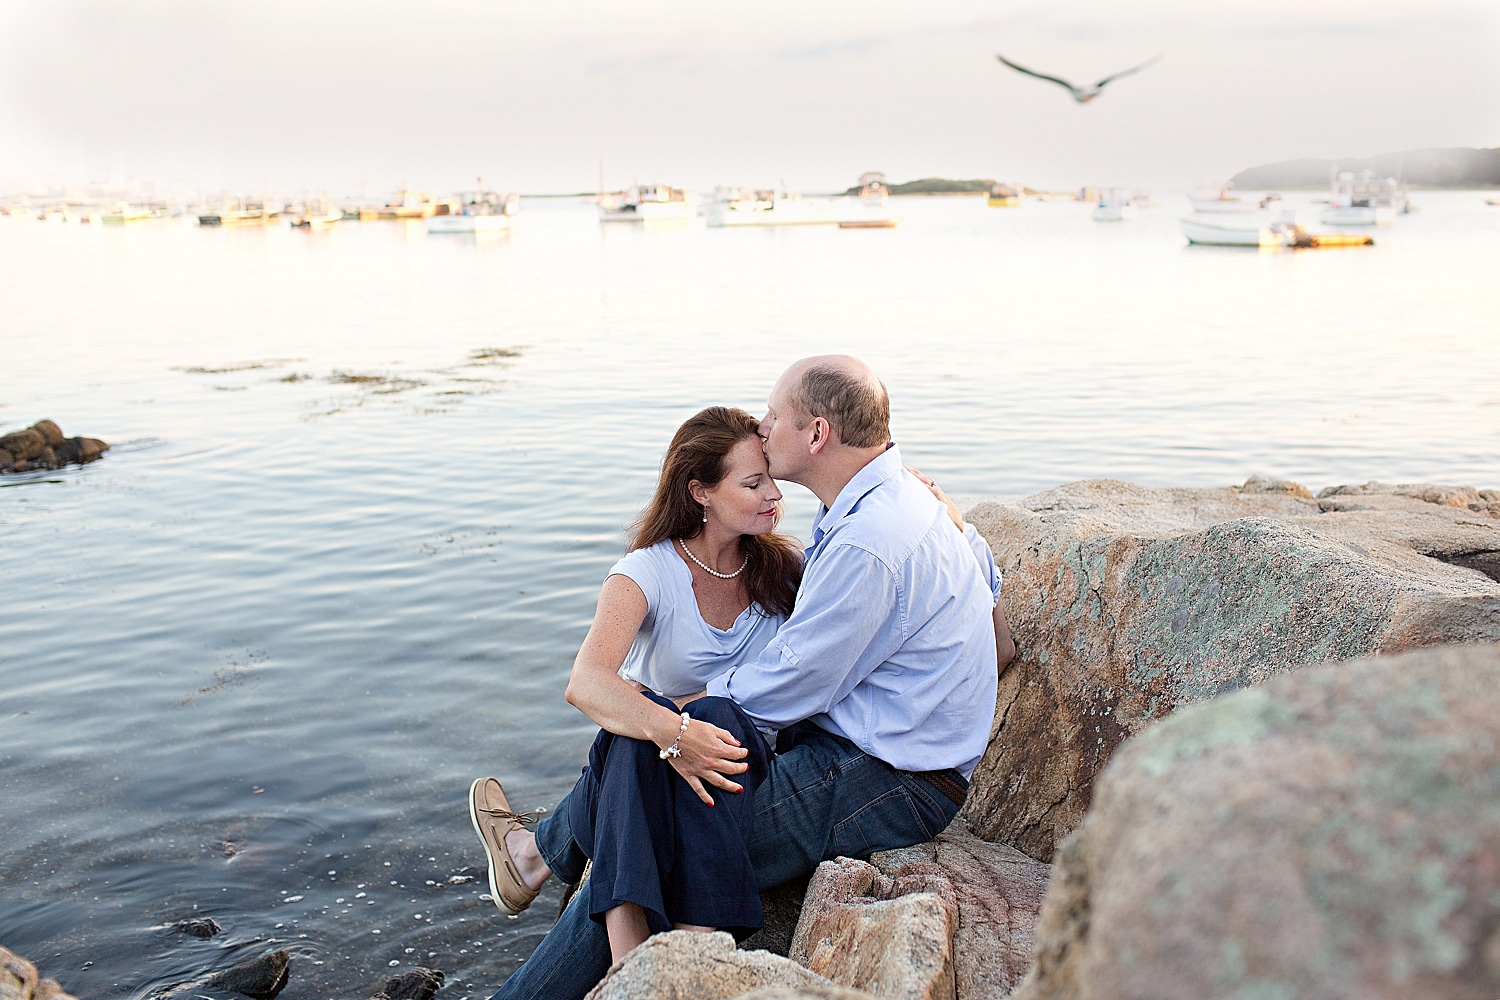 Engagement photos in Kennebunkport Maine at sunset